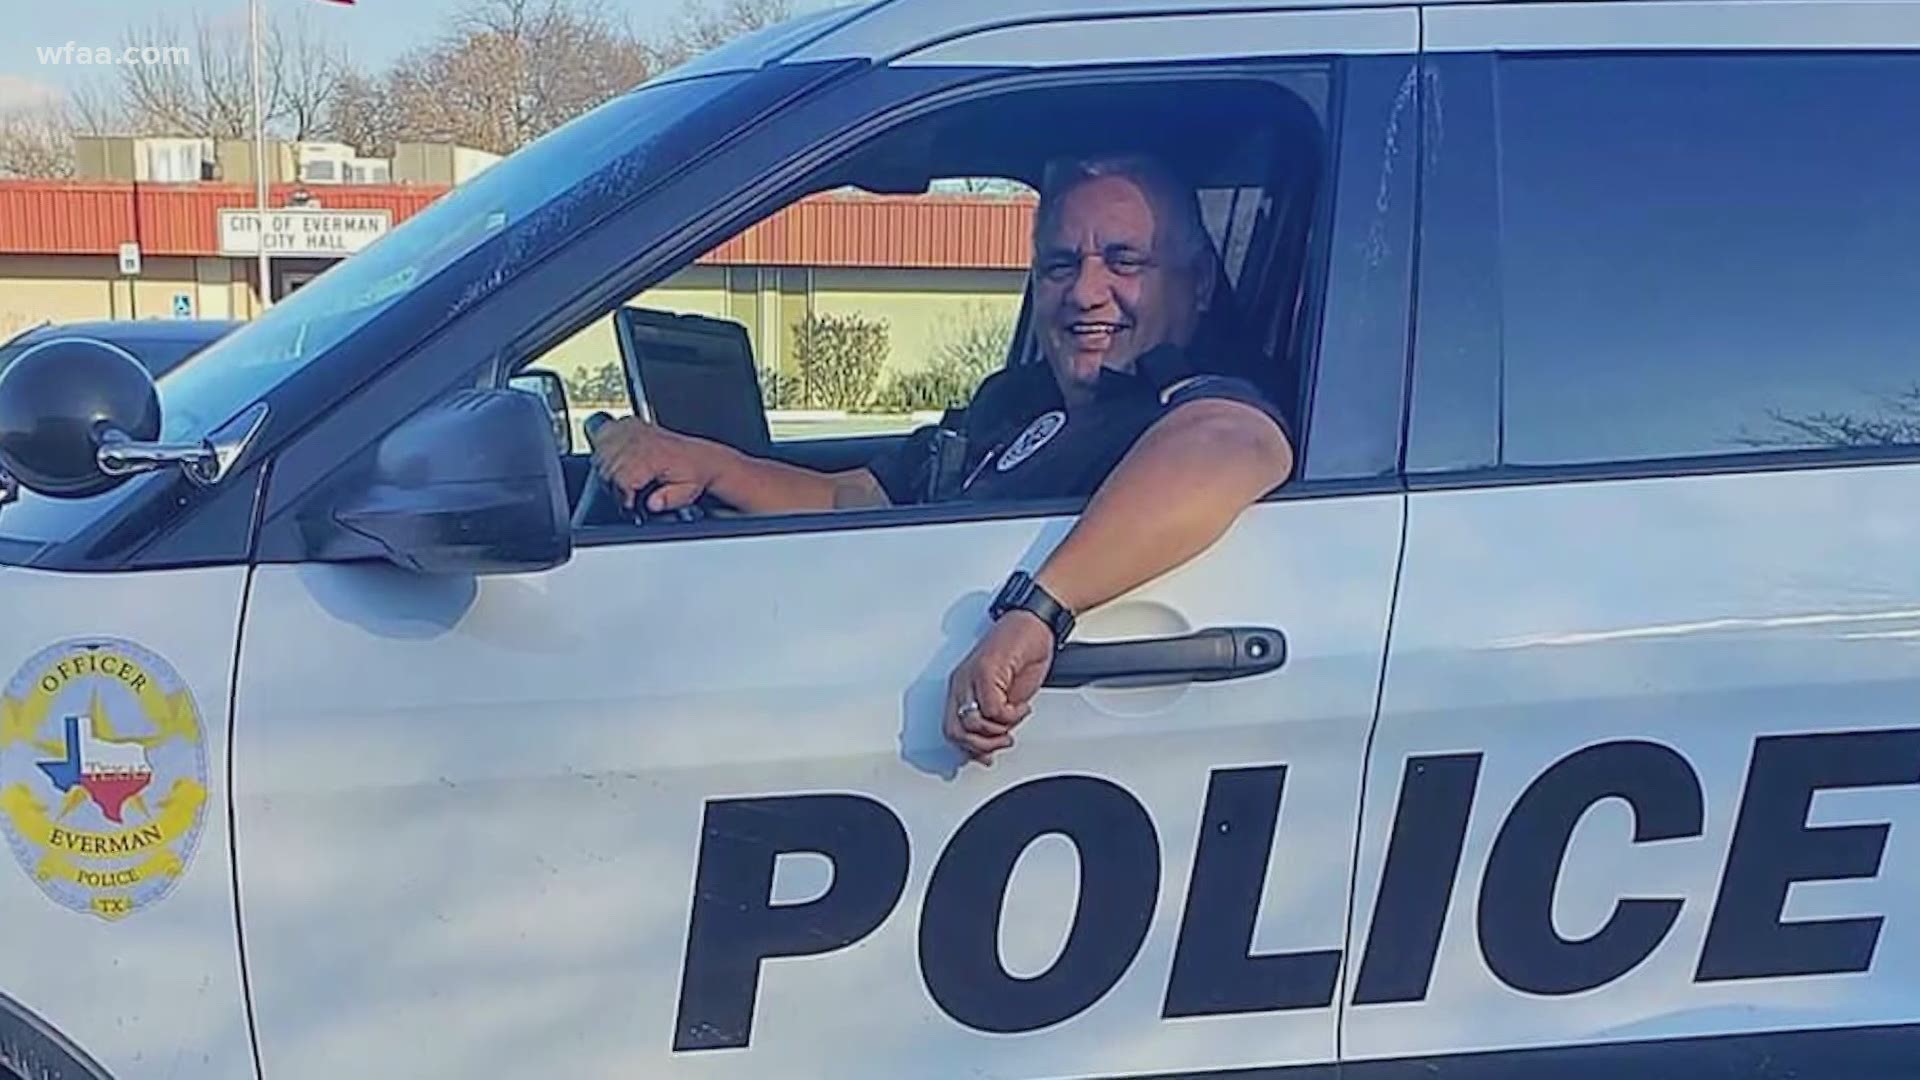 “Officer Arango served the community of Everman and Tarrant County for nearly 27 years with pride and honor,” a post on social media said.